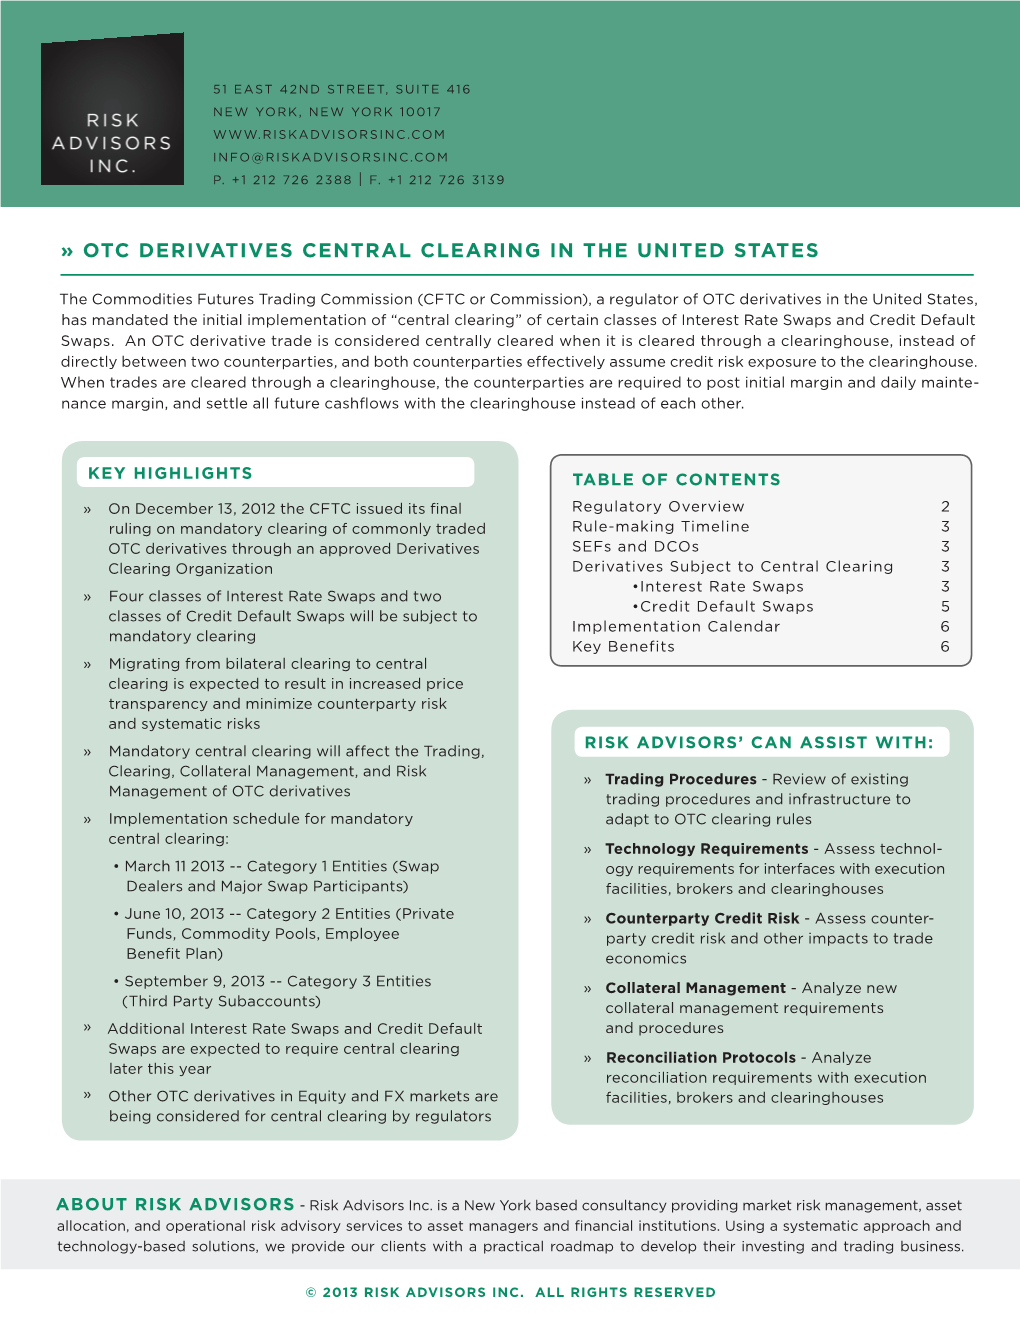 Otc Derivatives Central Clearing in the United States